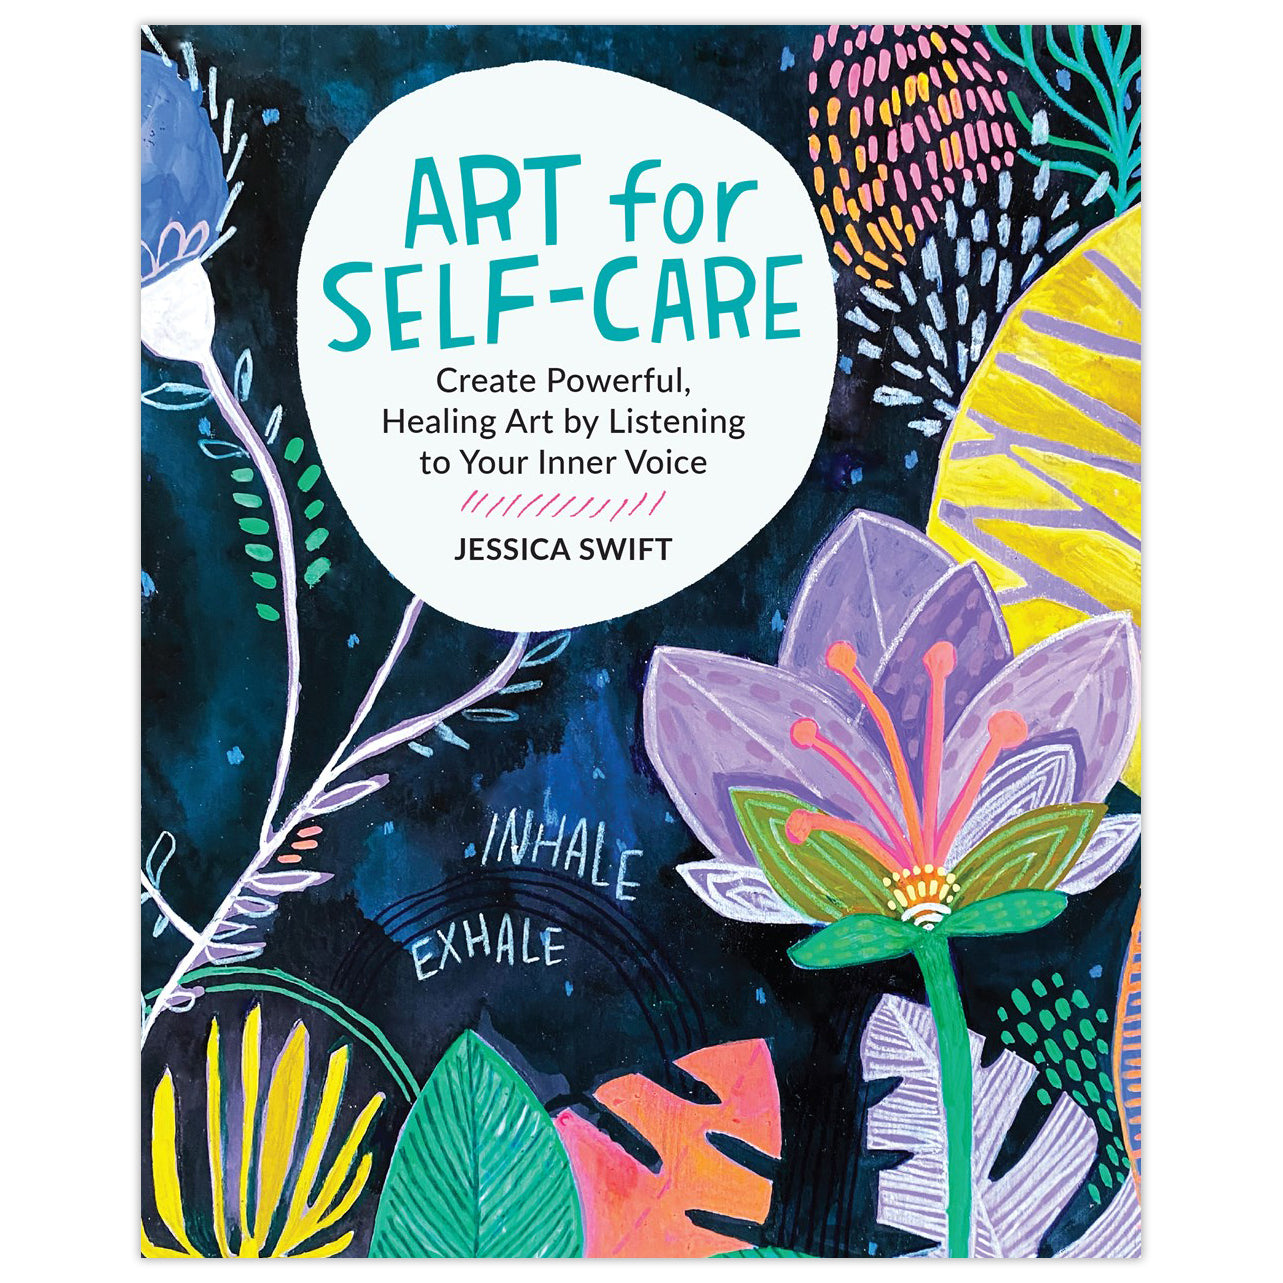 Art for Self-Care: Create Powerful, Healing Art by Listening to Your Inner Voice